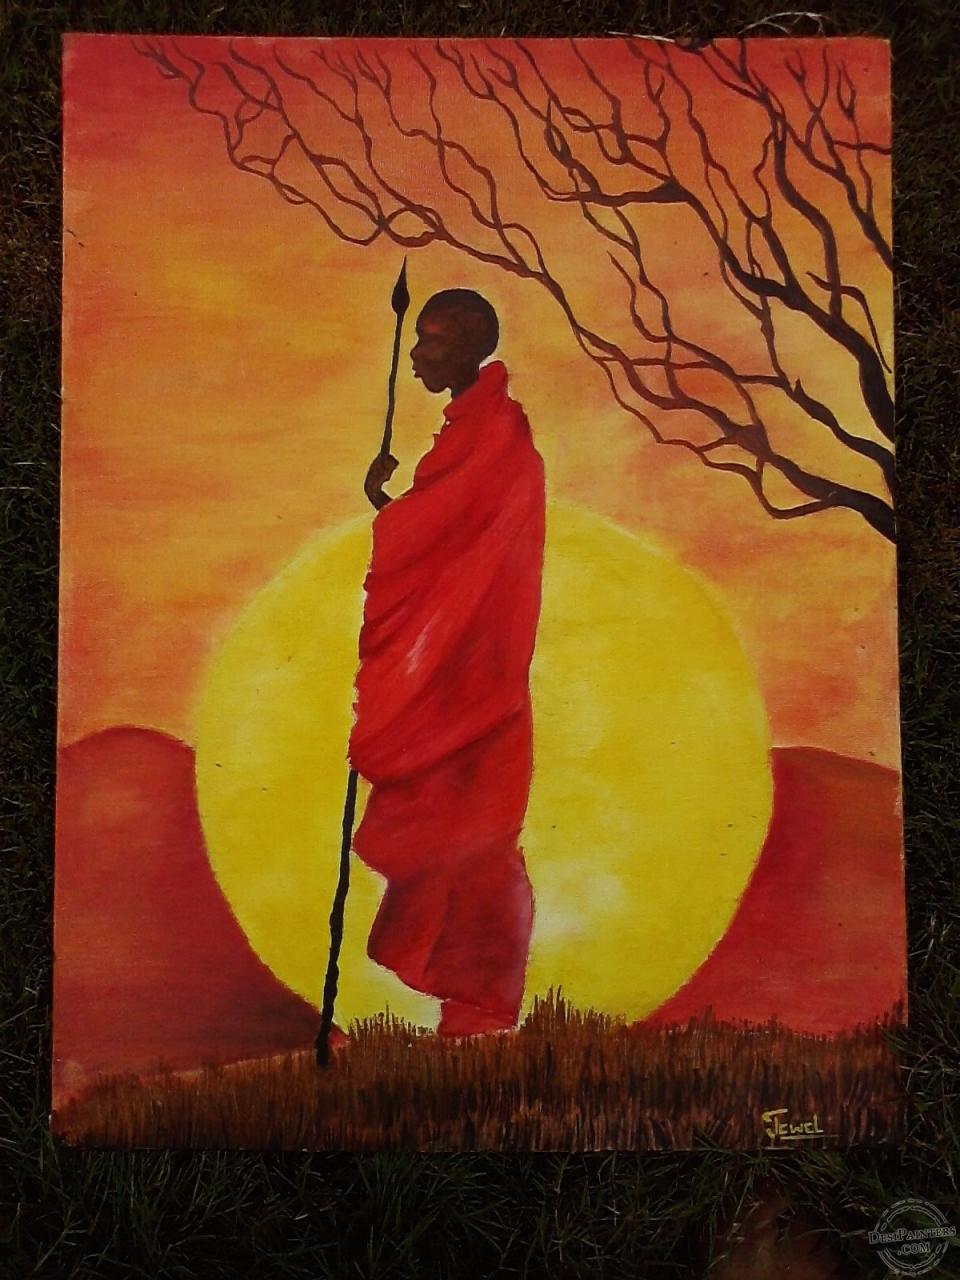 An oil painting of an ancient African man